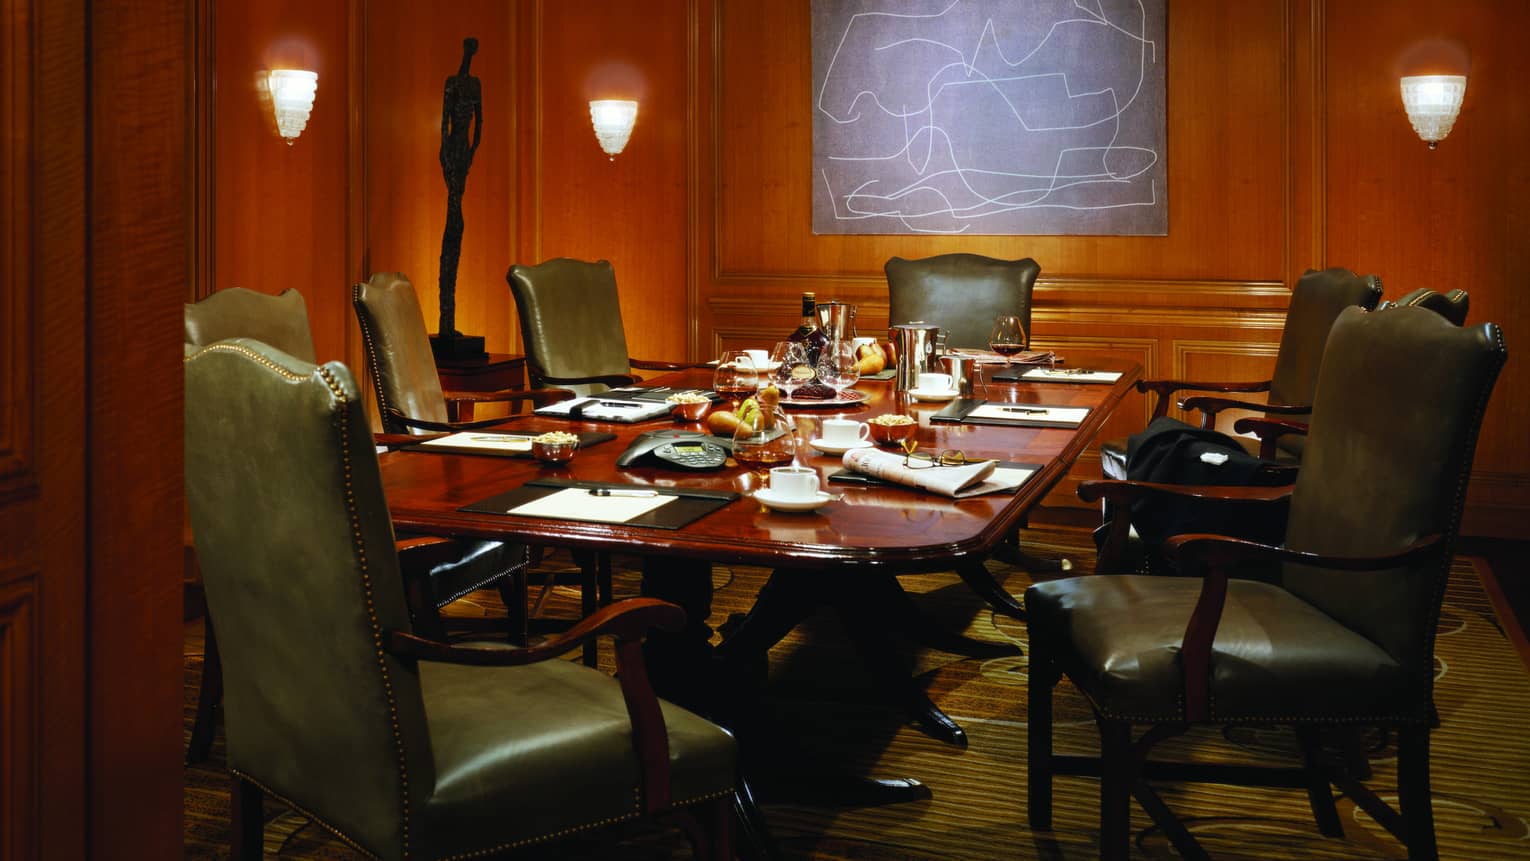 Large boardroom meeting table in room with wood panel walls